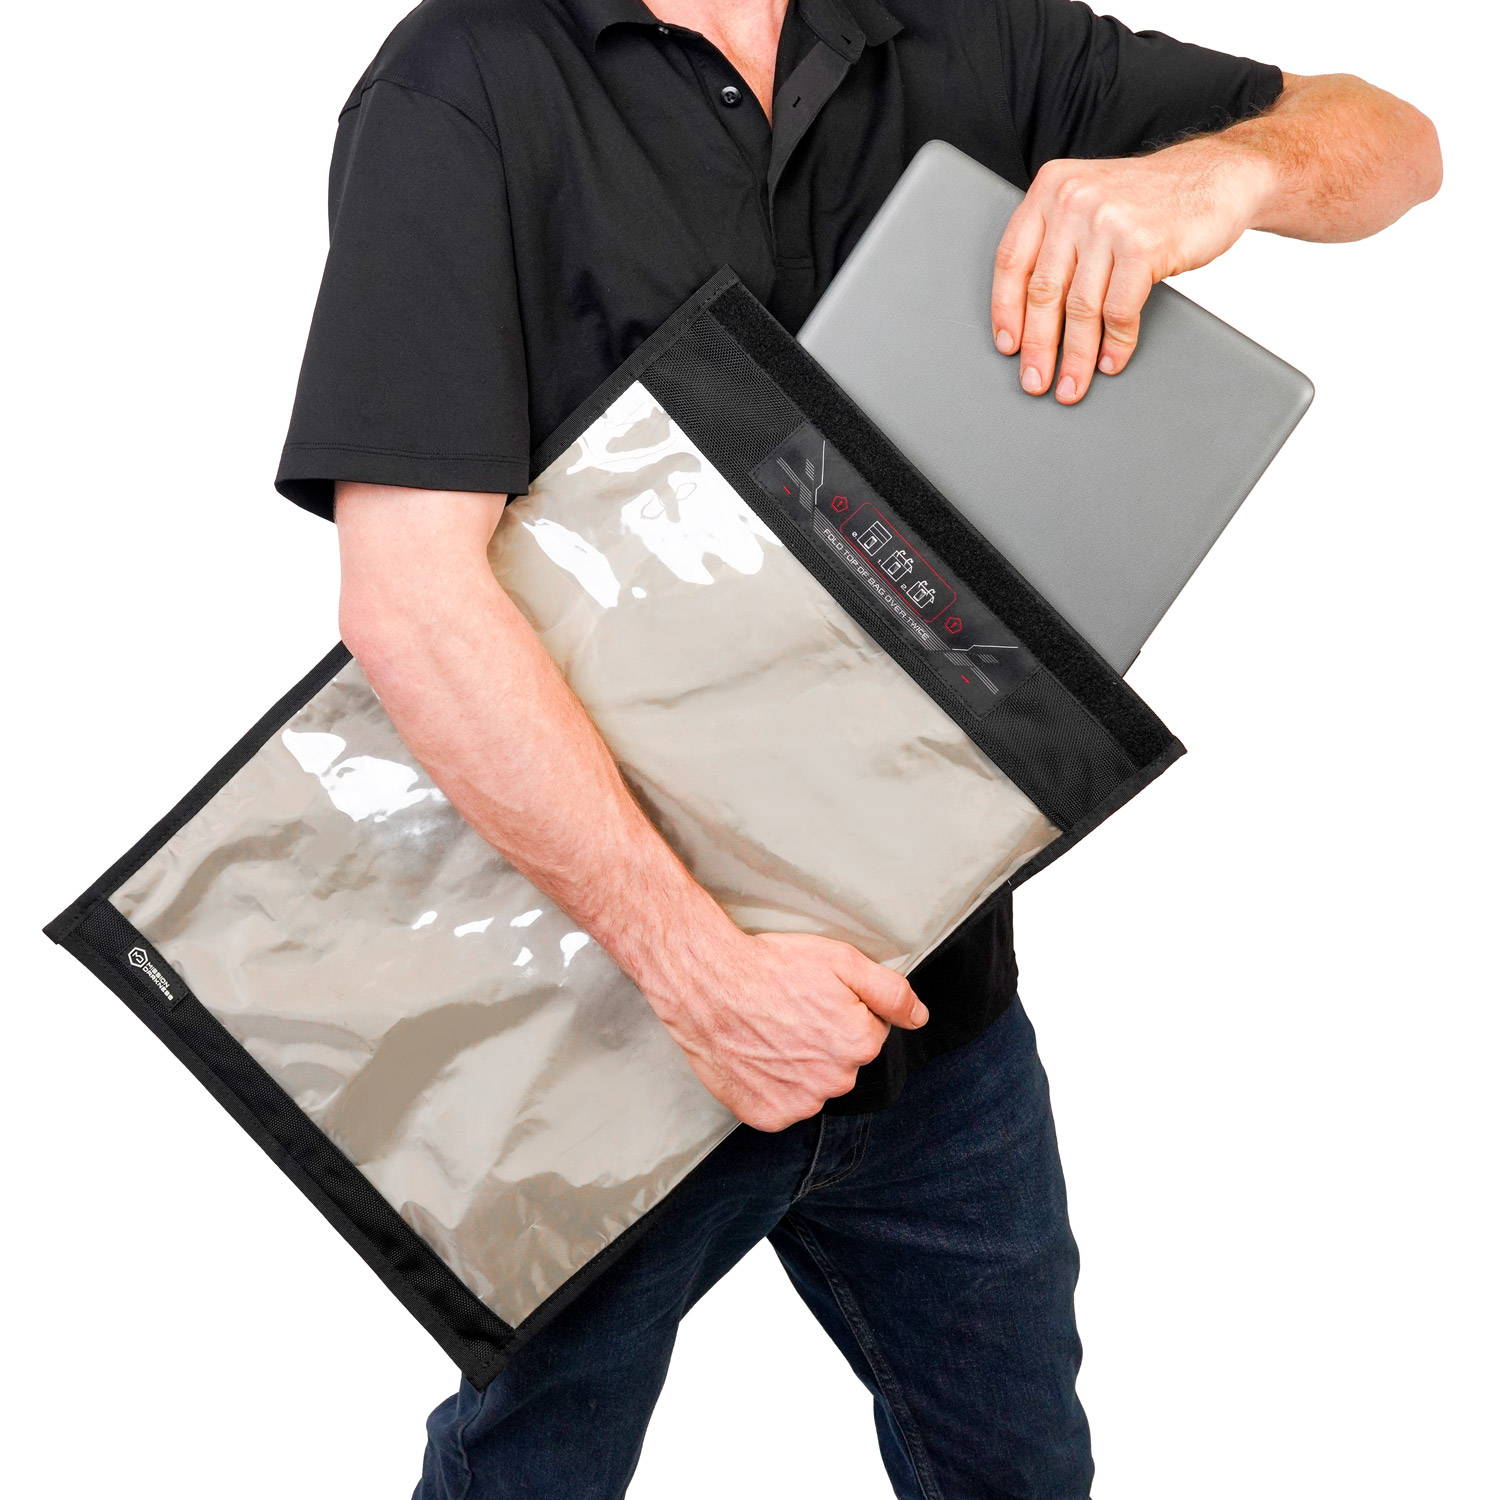 Mission Darkness Window Faraday Bag for Laptops transparent preview window to confirm signal cutoff and battery life